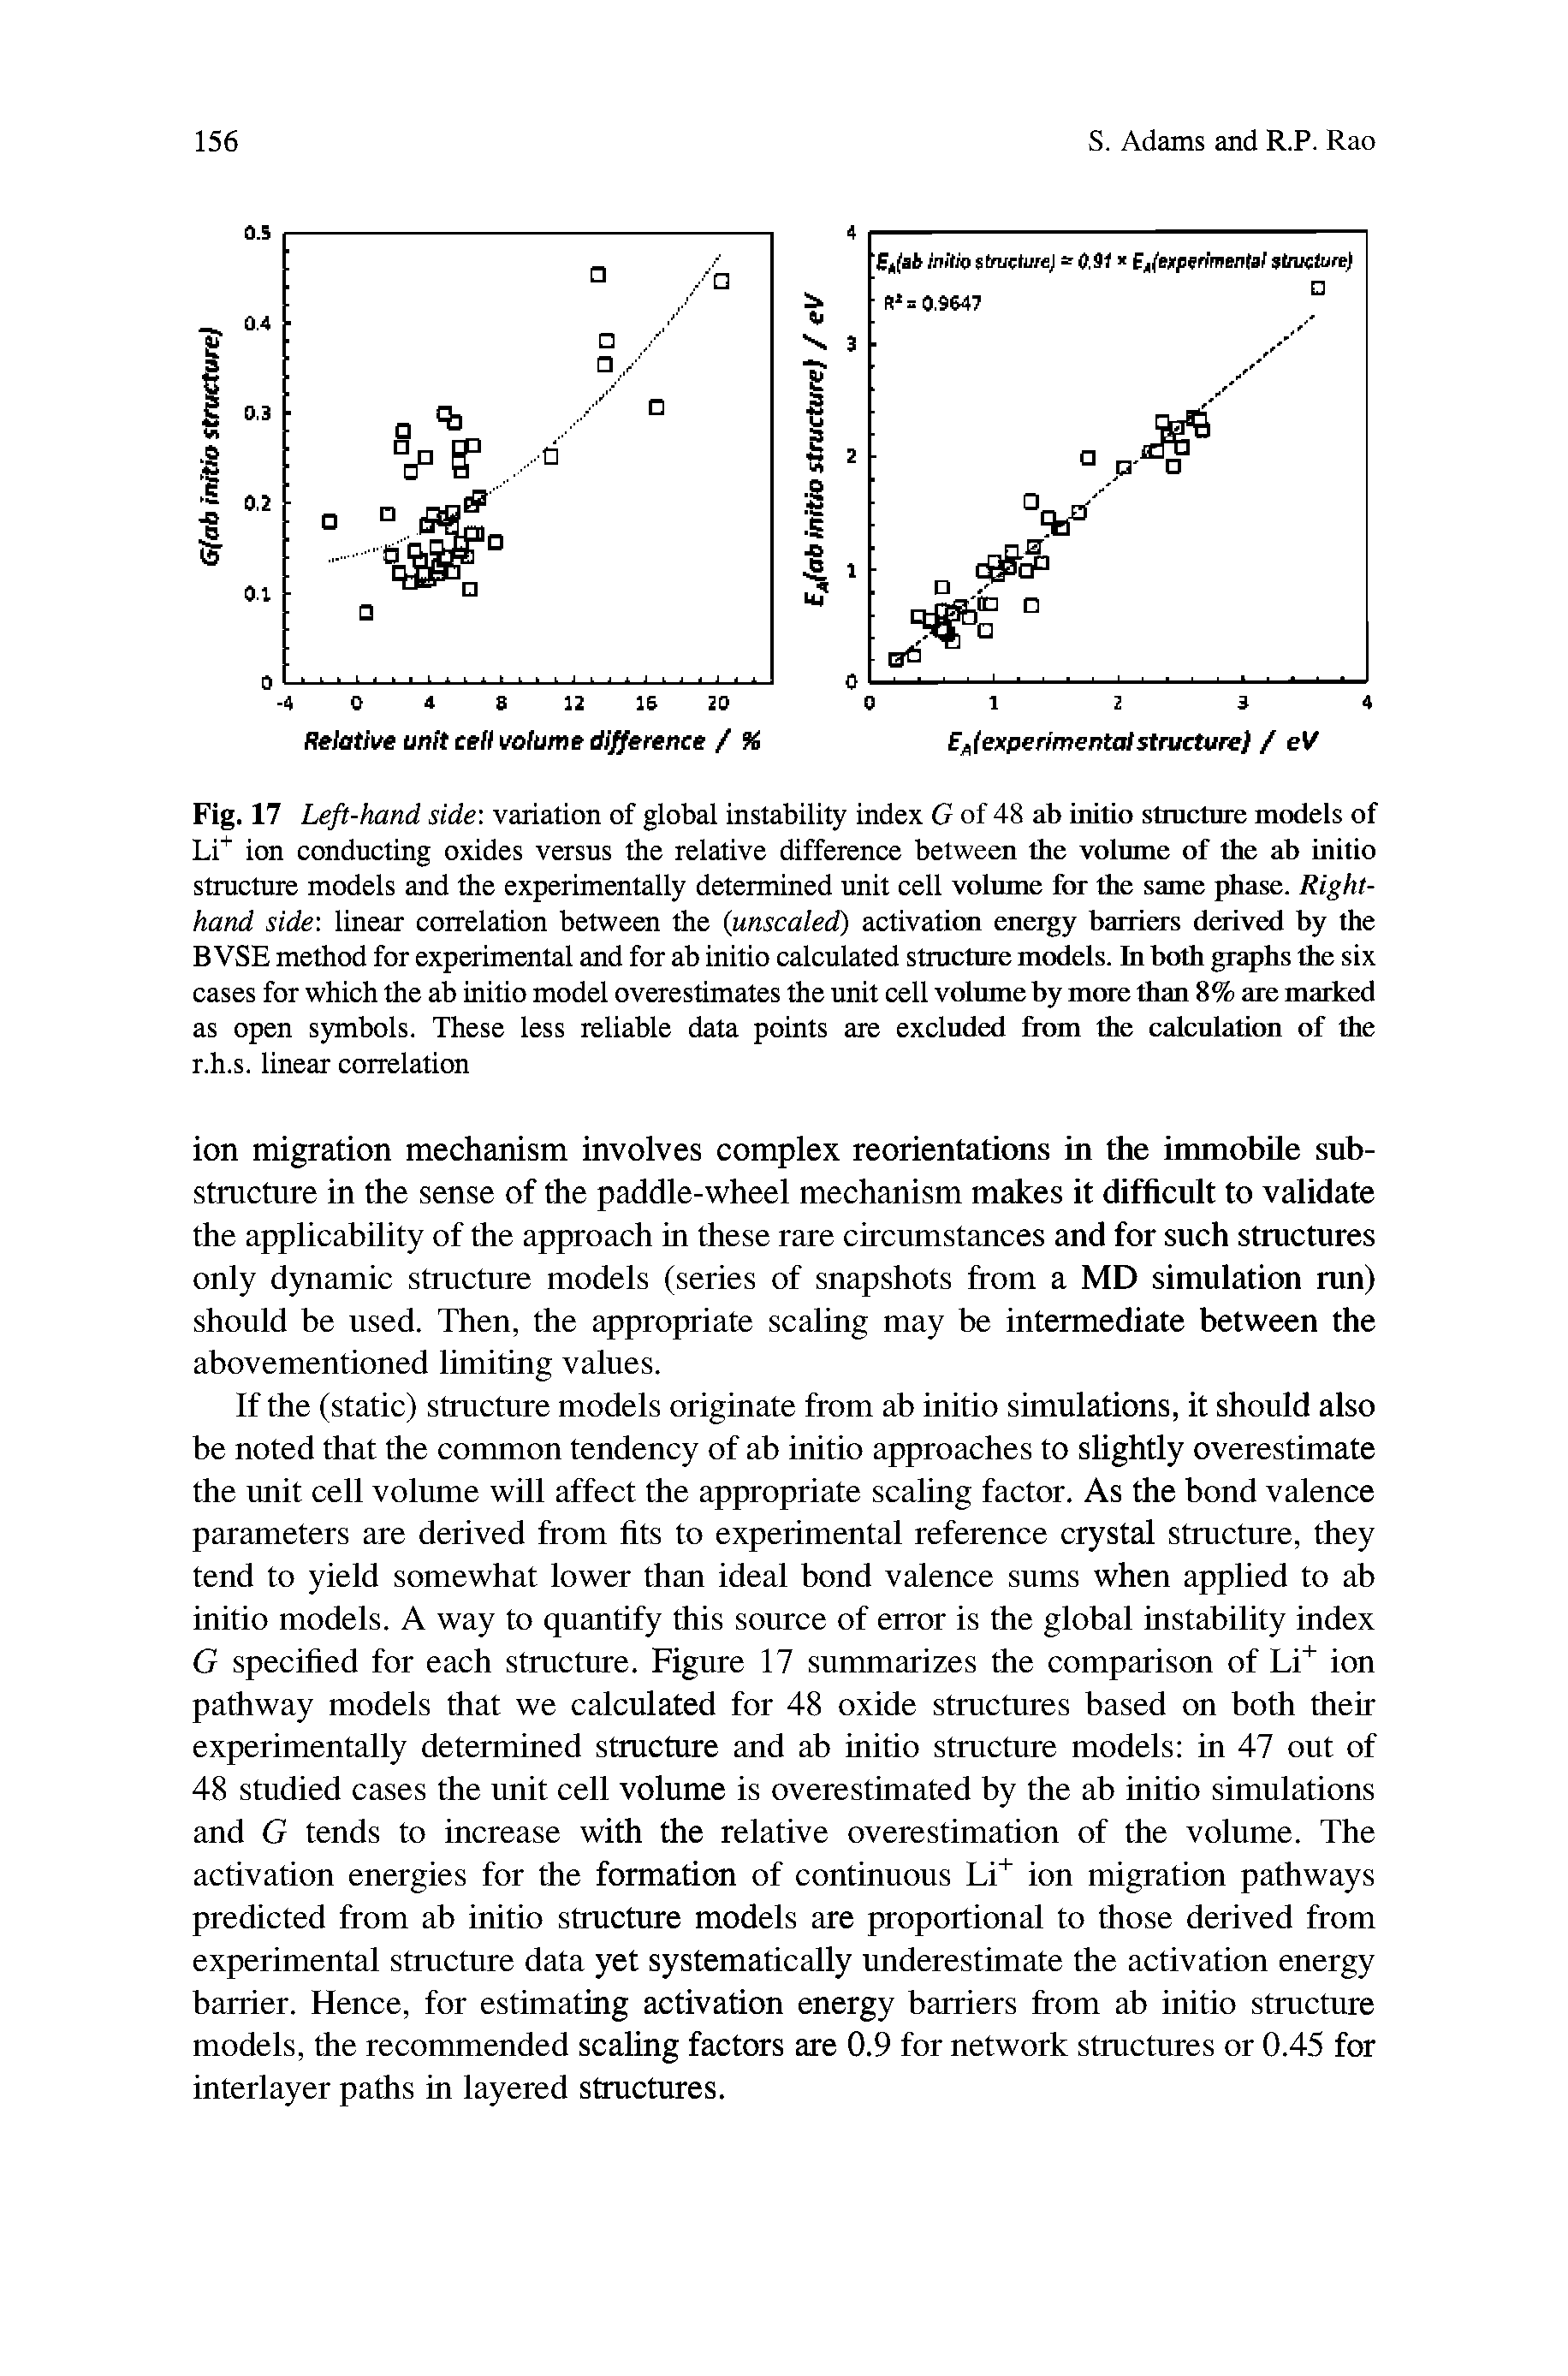 Fig. 17 Left-hand side variation of global instability index G of 48 ab initio structure models of Li ion conducting oxides versus the relative difference between the volume of the ab initio structure models and the experimentally determined unit cell volume for the same phase. Right-hand side linear correlation between the (unsealed) activatirai energy barriers derived by the B VSE method for experimental and for ab initio calculated structure models. In both graphs the six cases for which the ab initio model overestimates the unit cell volume by more than 8% are marked as open symbols. These less reliable data points are excluded liom the calculation of the r.h.s. linear correlation...